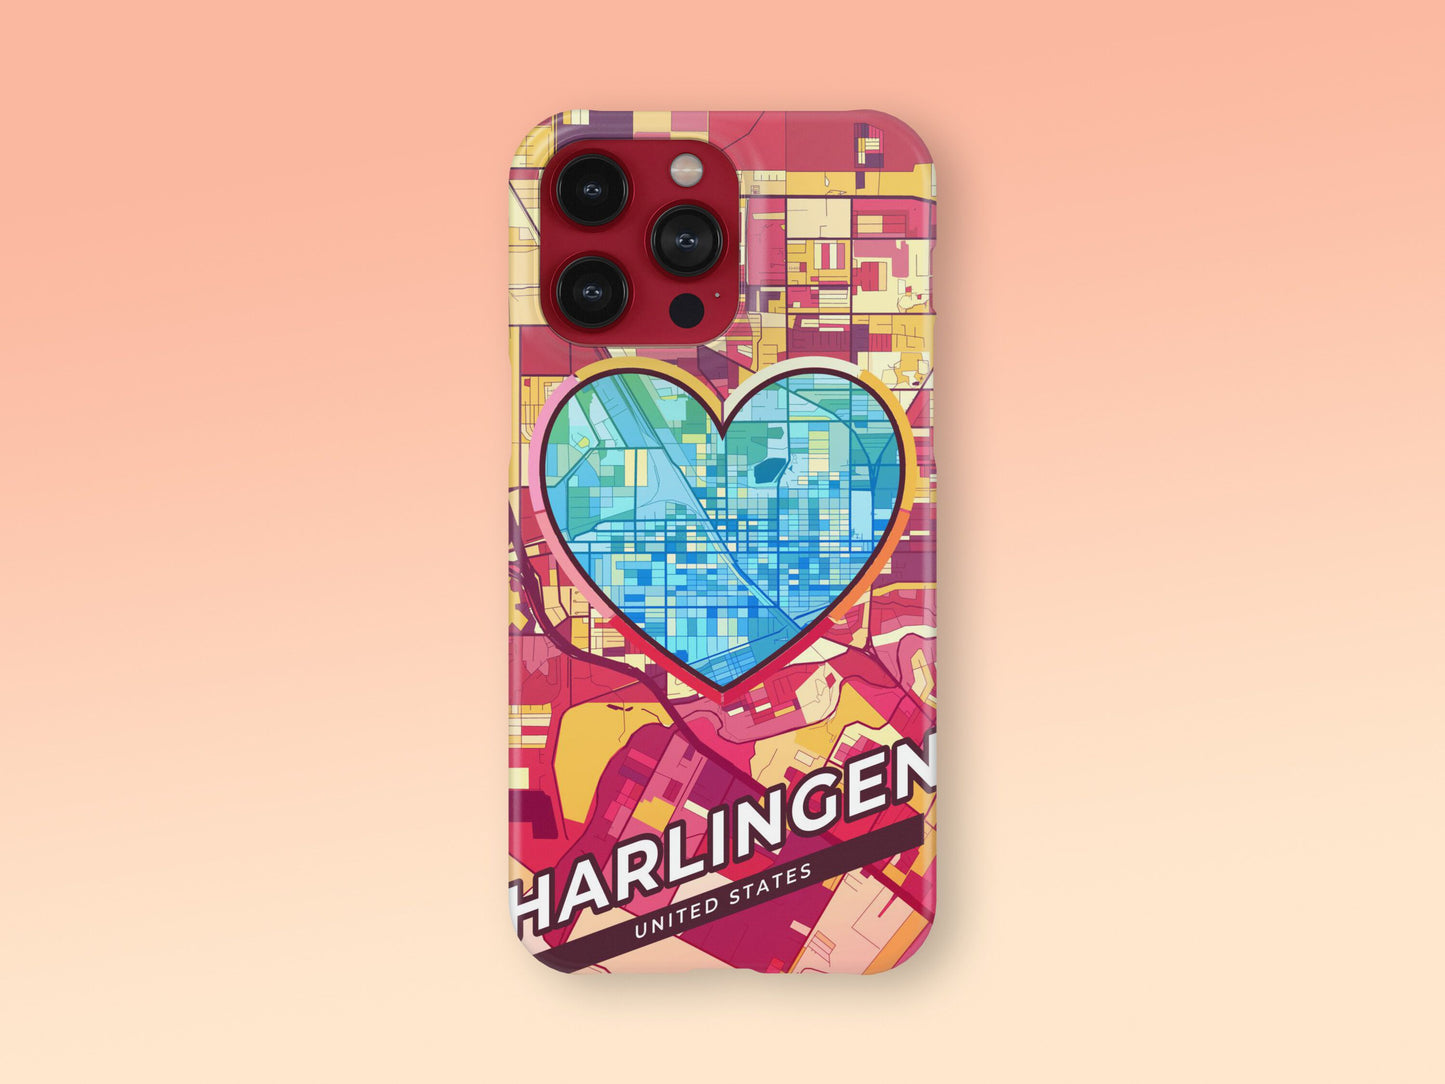 Harlingen Texas slim phone case with colorful icon. Birthday, wedding or housewarming gift. Couple match cases. 2